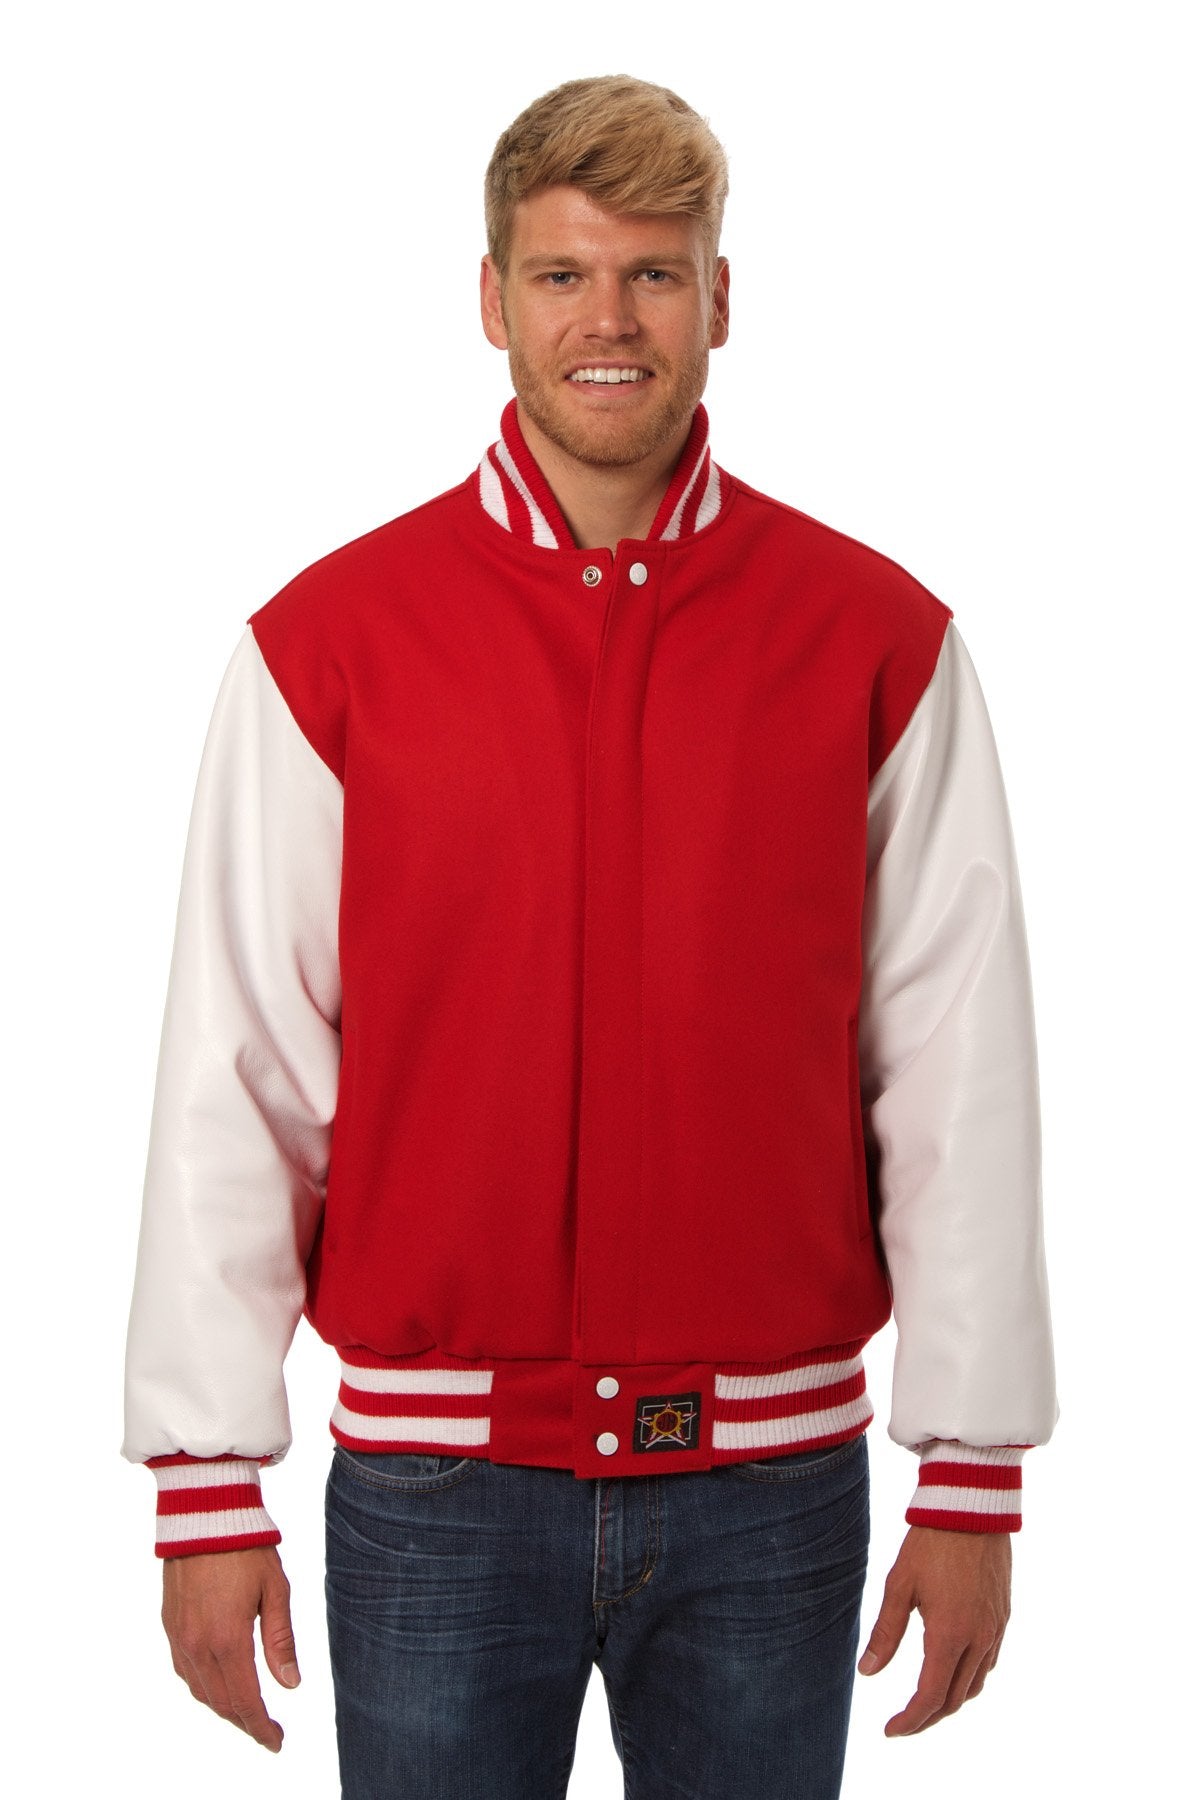 DETROIT RED WINGS -ROOTS Varsity Lettermans Jacket Canada Leather Wool NHL  Coat